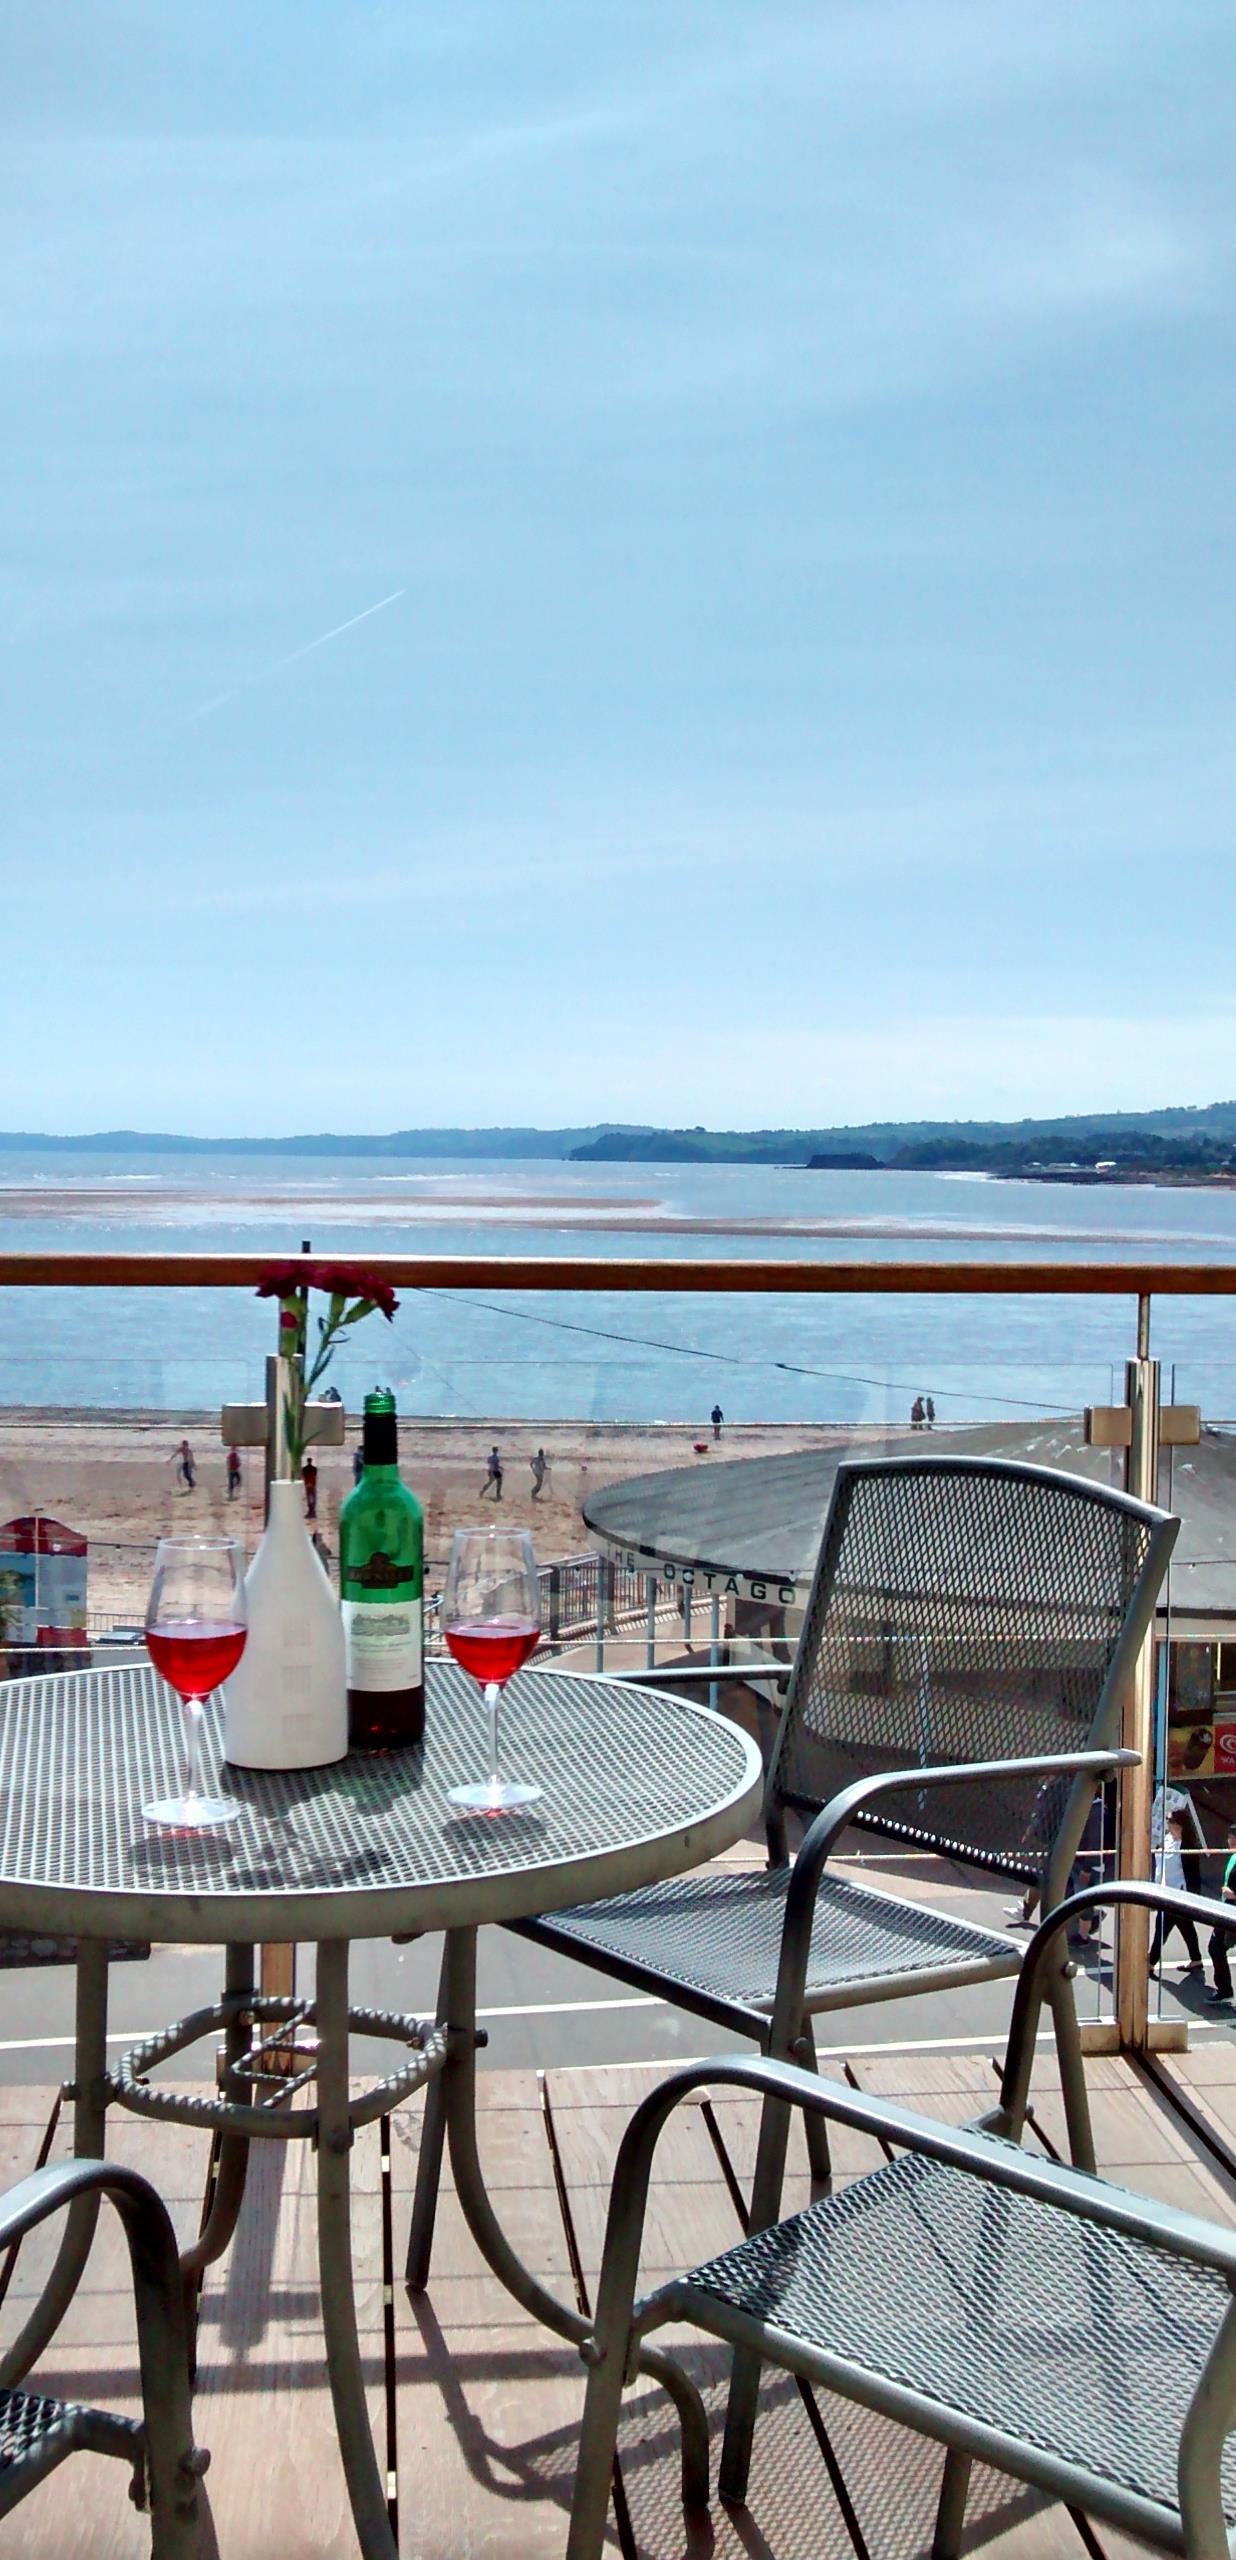 View across balcony table with wine bottle out to sea